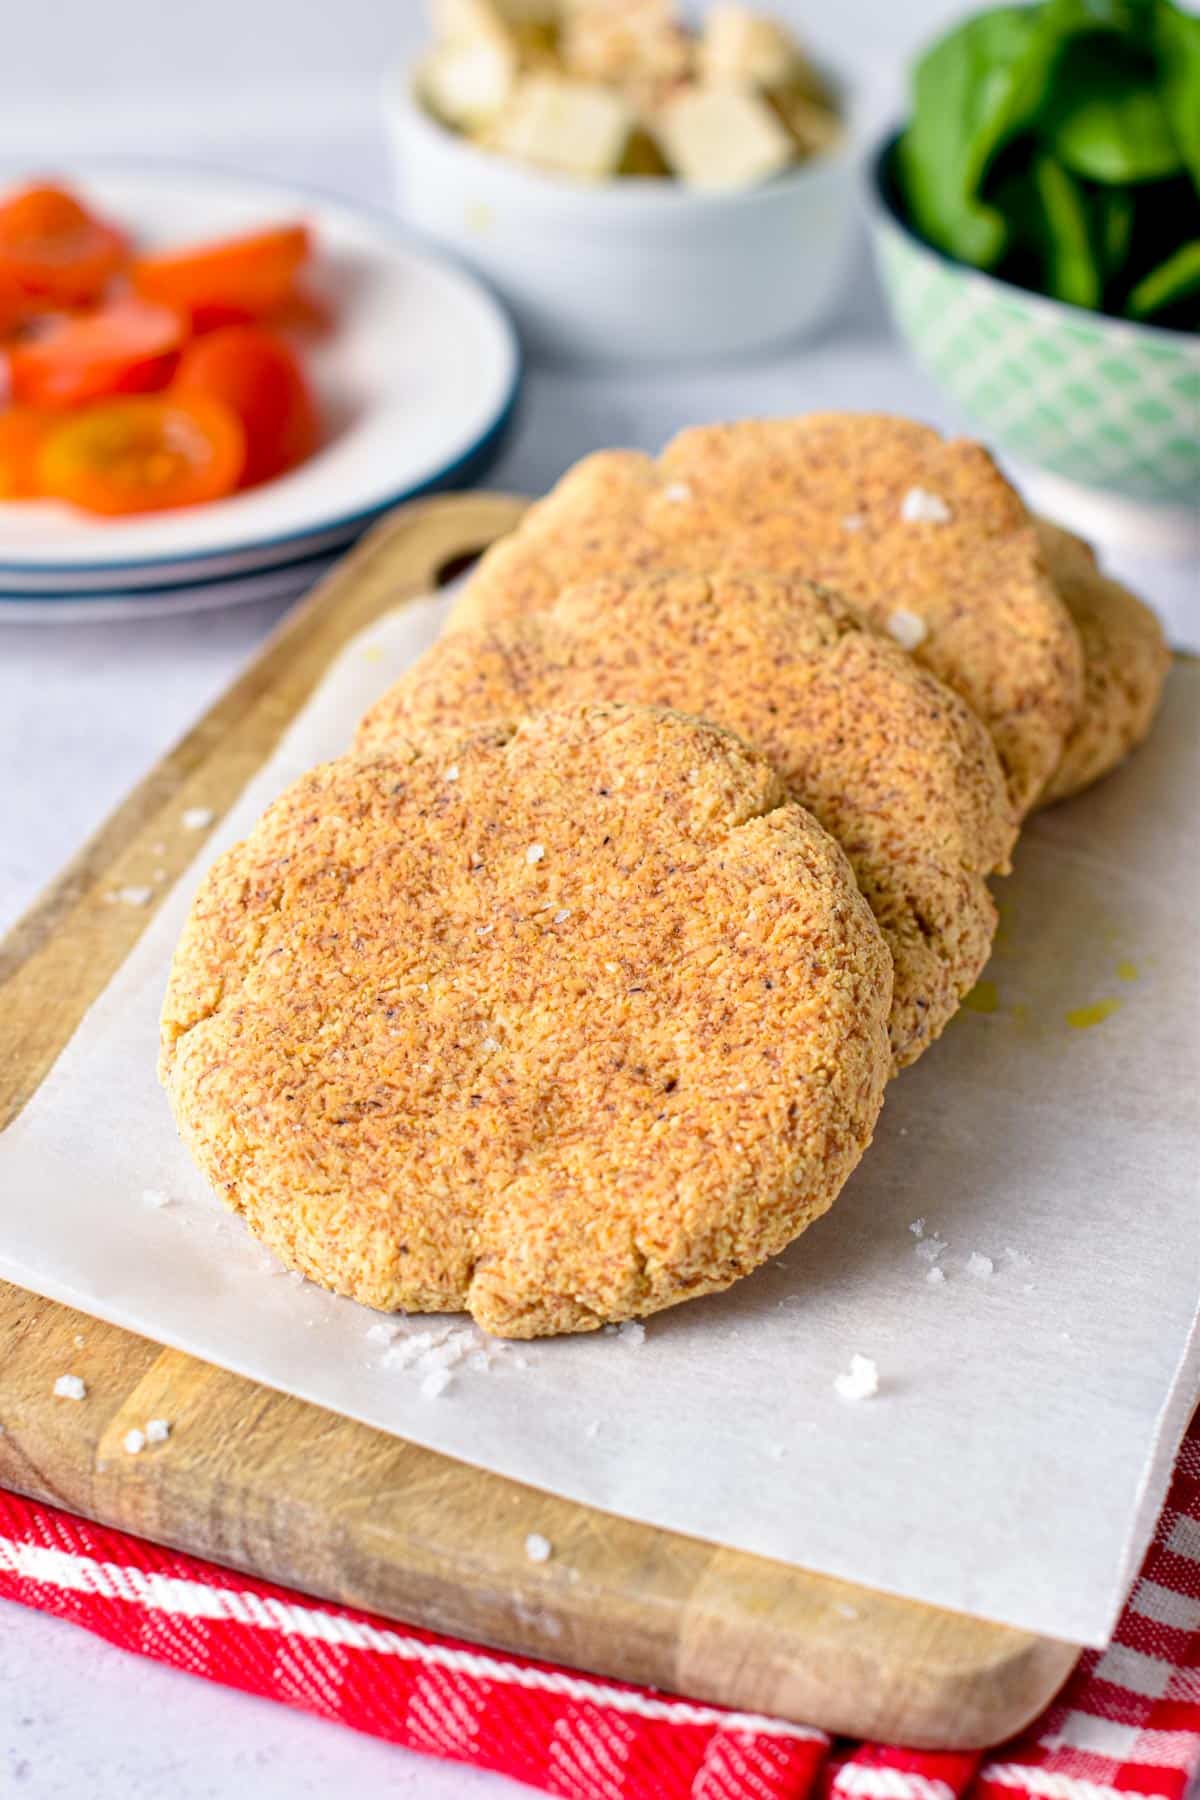 These low carb pita bread are soft, pita flatbread made from low-carb flours and no eggs so you can share with your vegan keto guest. Plus, one pita bread only contains 4.4 g net carbs and they are gluten-free.